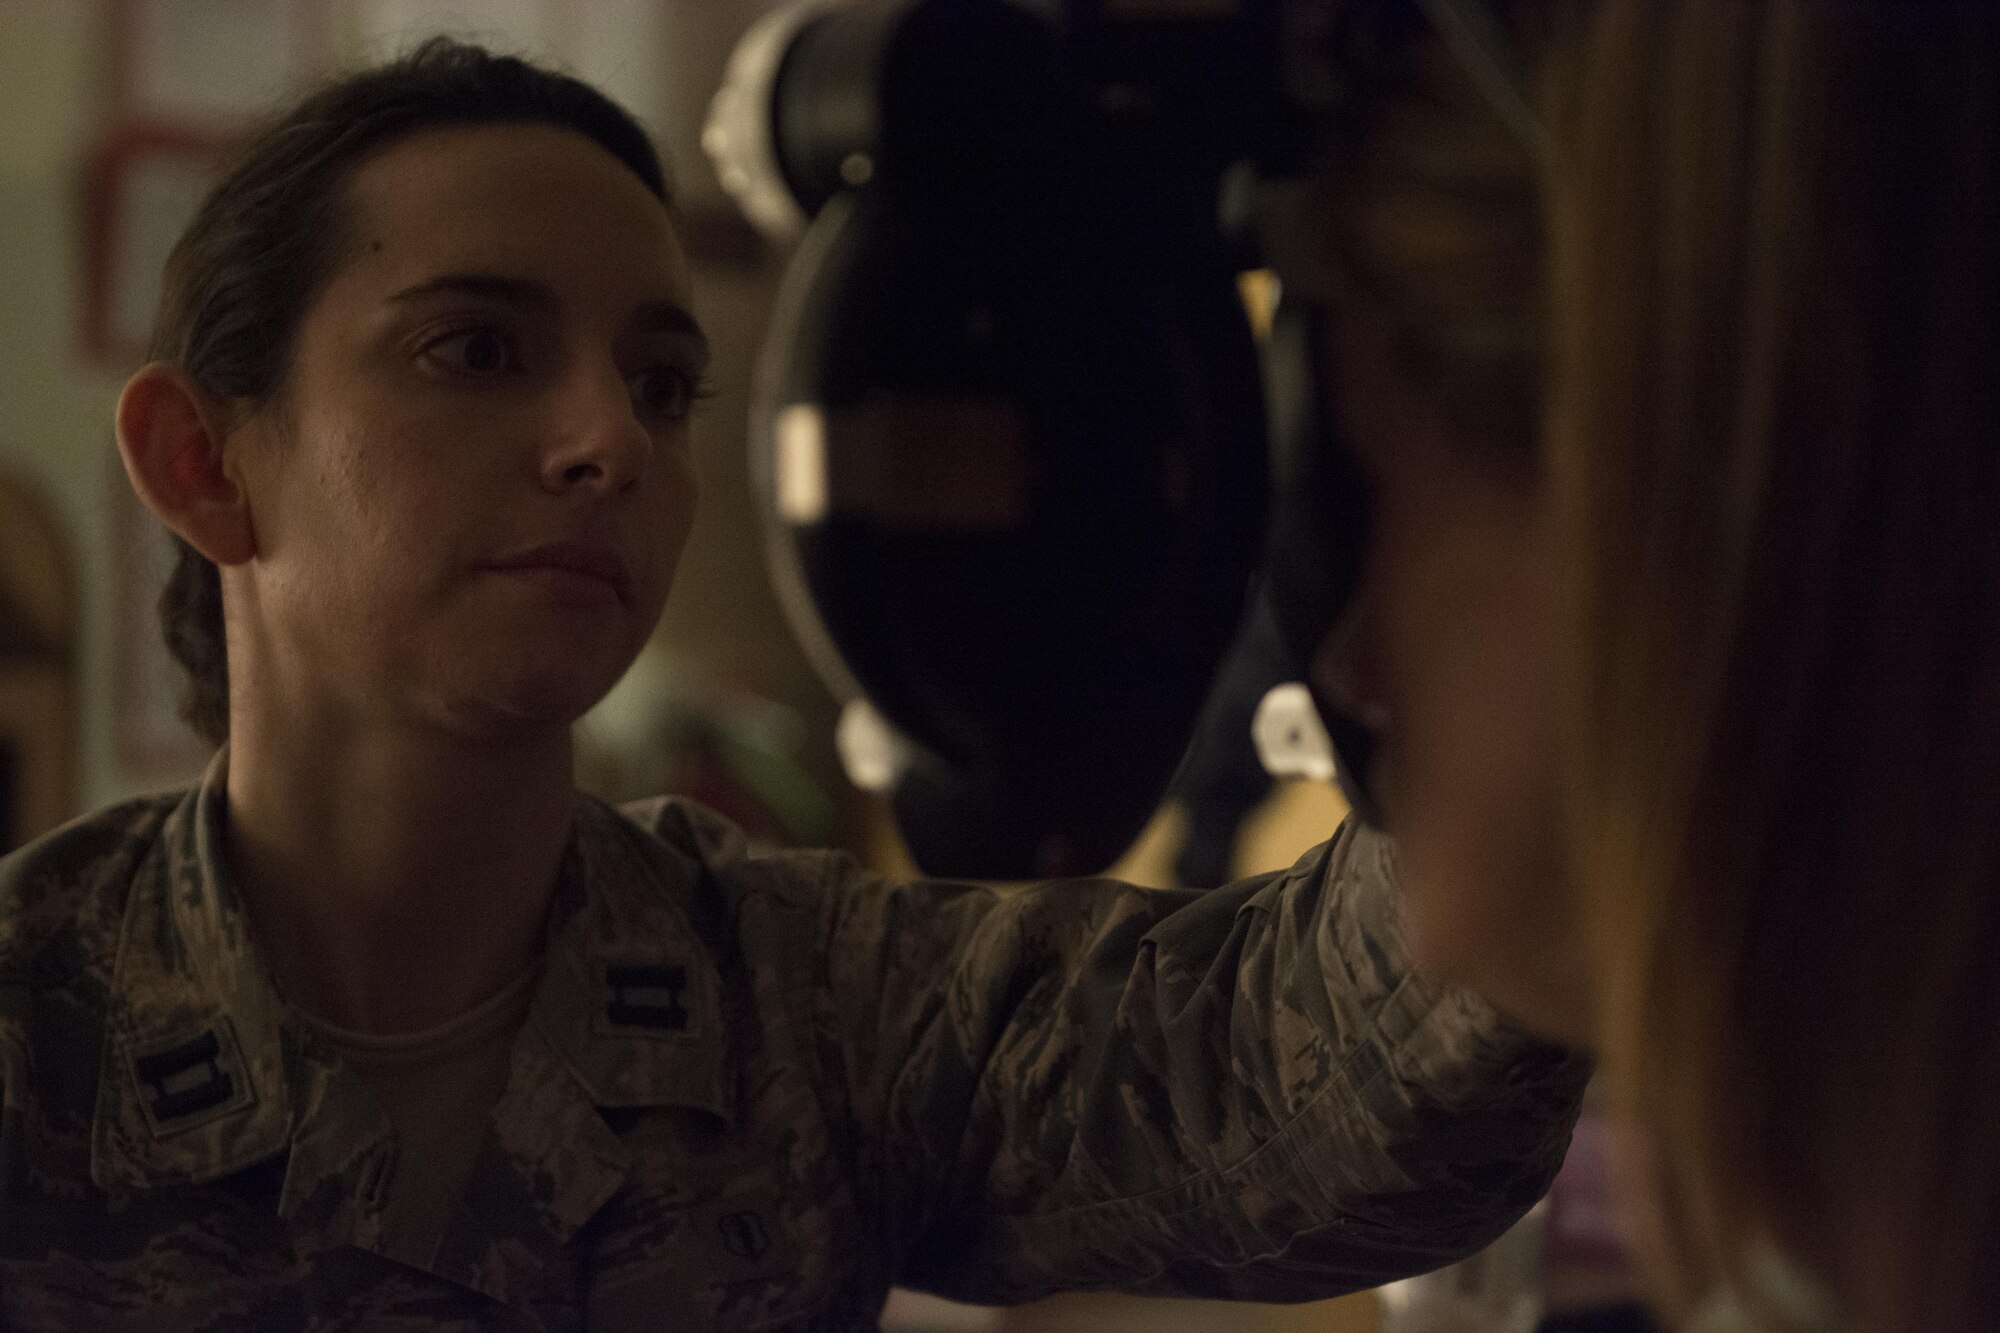 Air Force Capt. Alison Hixenbaugh, an optometrist assigned to 514th Dental Squadron, McGuire Air Force Base, Air Force Reserve, N.J., conducts a vision test to a mother of three during  the Smoky Mountain Medical Innovative Readiness Training in Bryson City, N.C., Aug. 3, 2017.